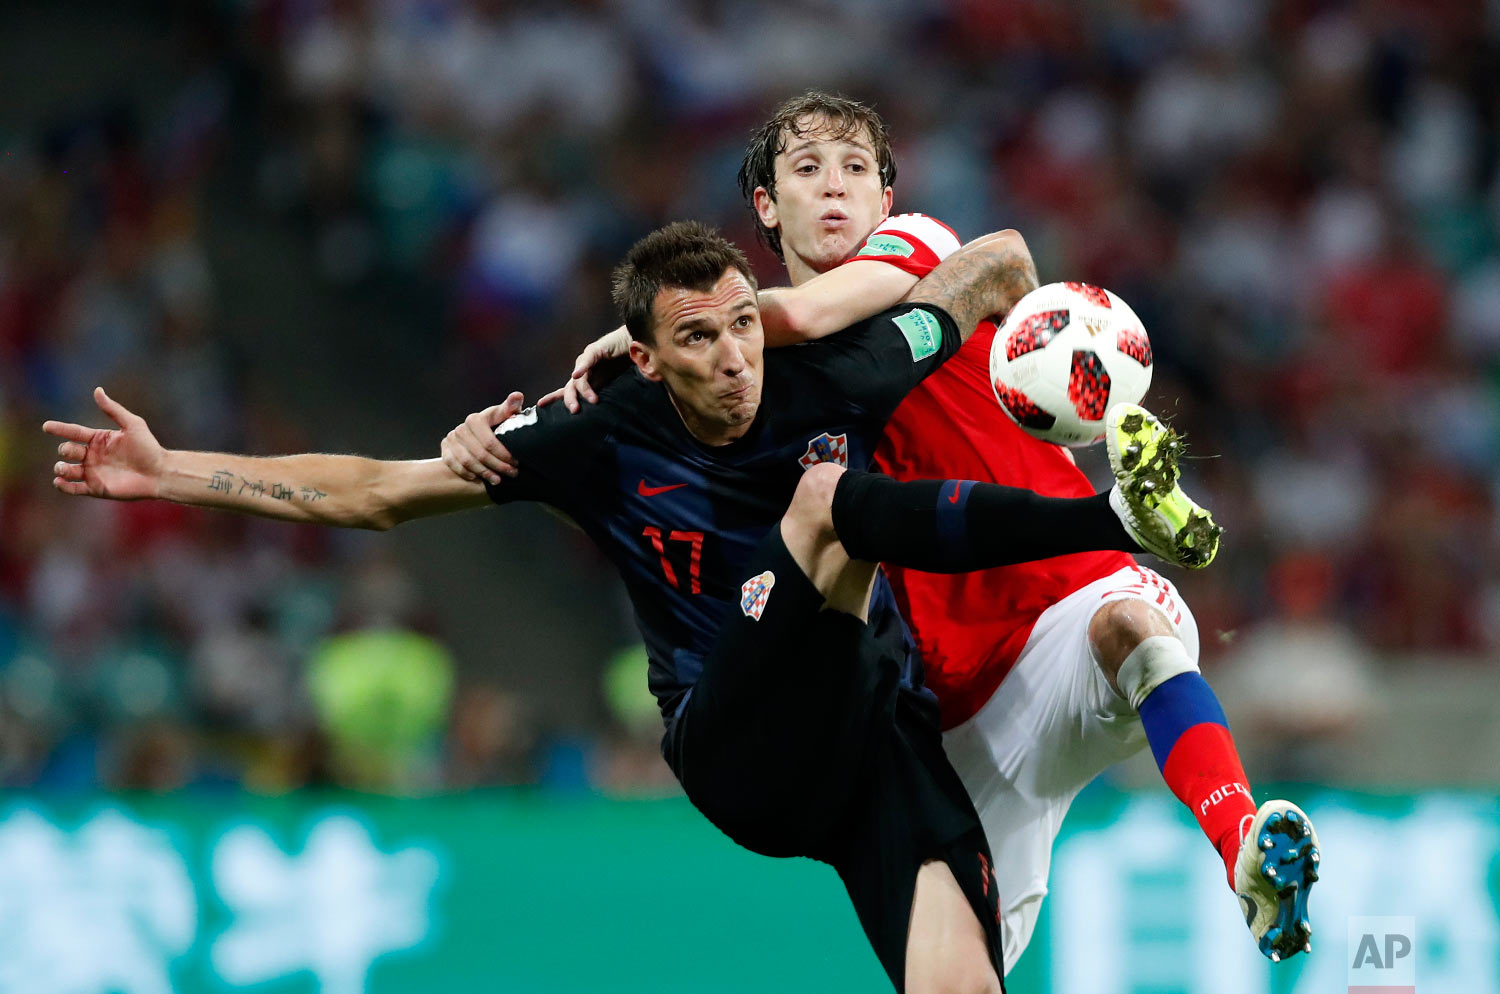  Croatia's Mario Mandzukic, left, challenges for the ball with Russia's Mario Fernandes during the quarterfinal match between Russia and Croatia at the 2018 soccer World Cup in the Fisht Stadium, in Sochi, Russia on July 7, 2018. (AP Photo/Rebecca Bl